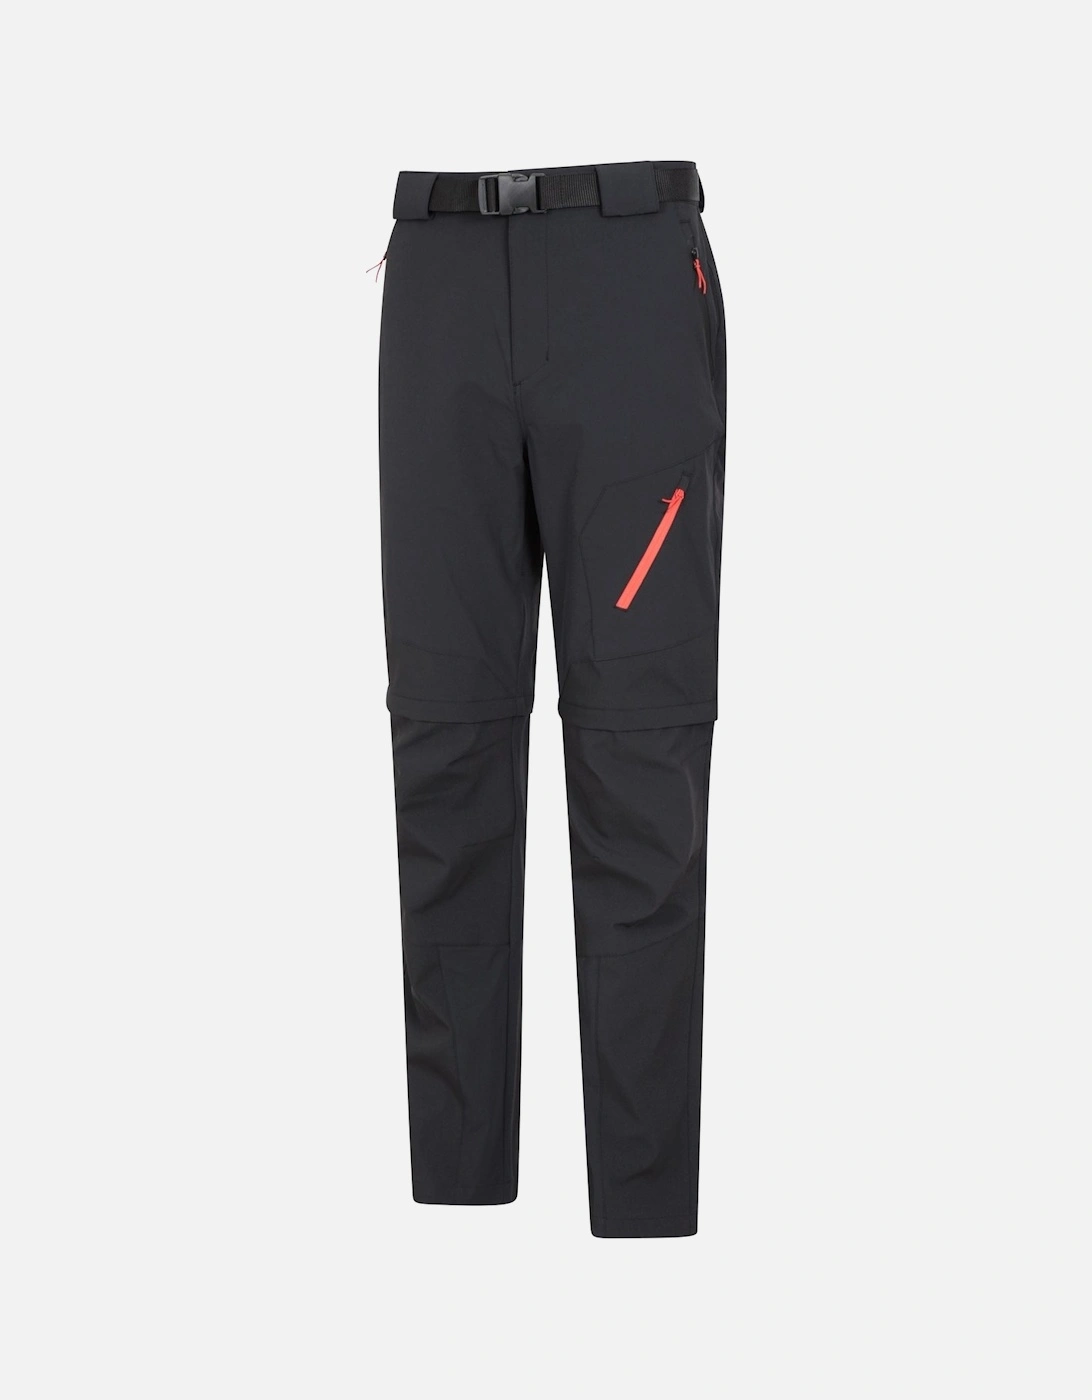 Mens Forest Convertible Hiking Trousers